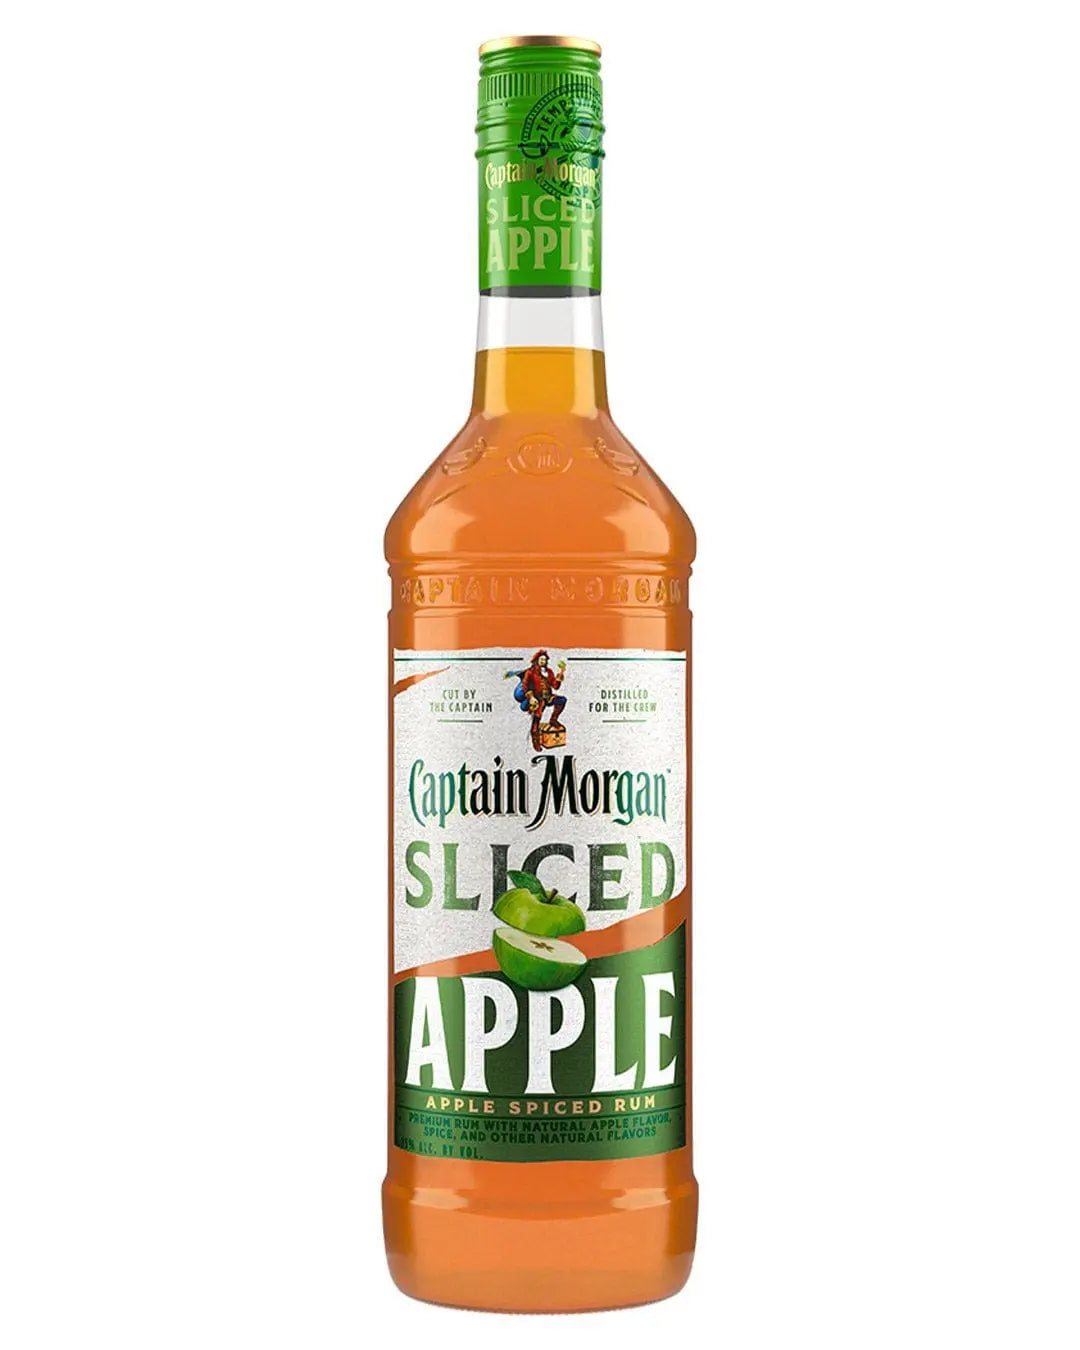 Limited Edition Captain Morgan Sliced Apple Rum, 75 cl Rum